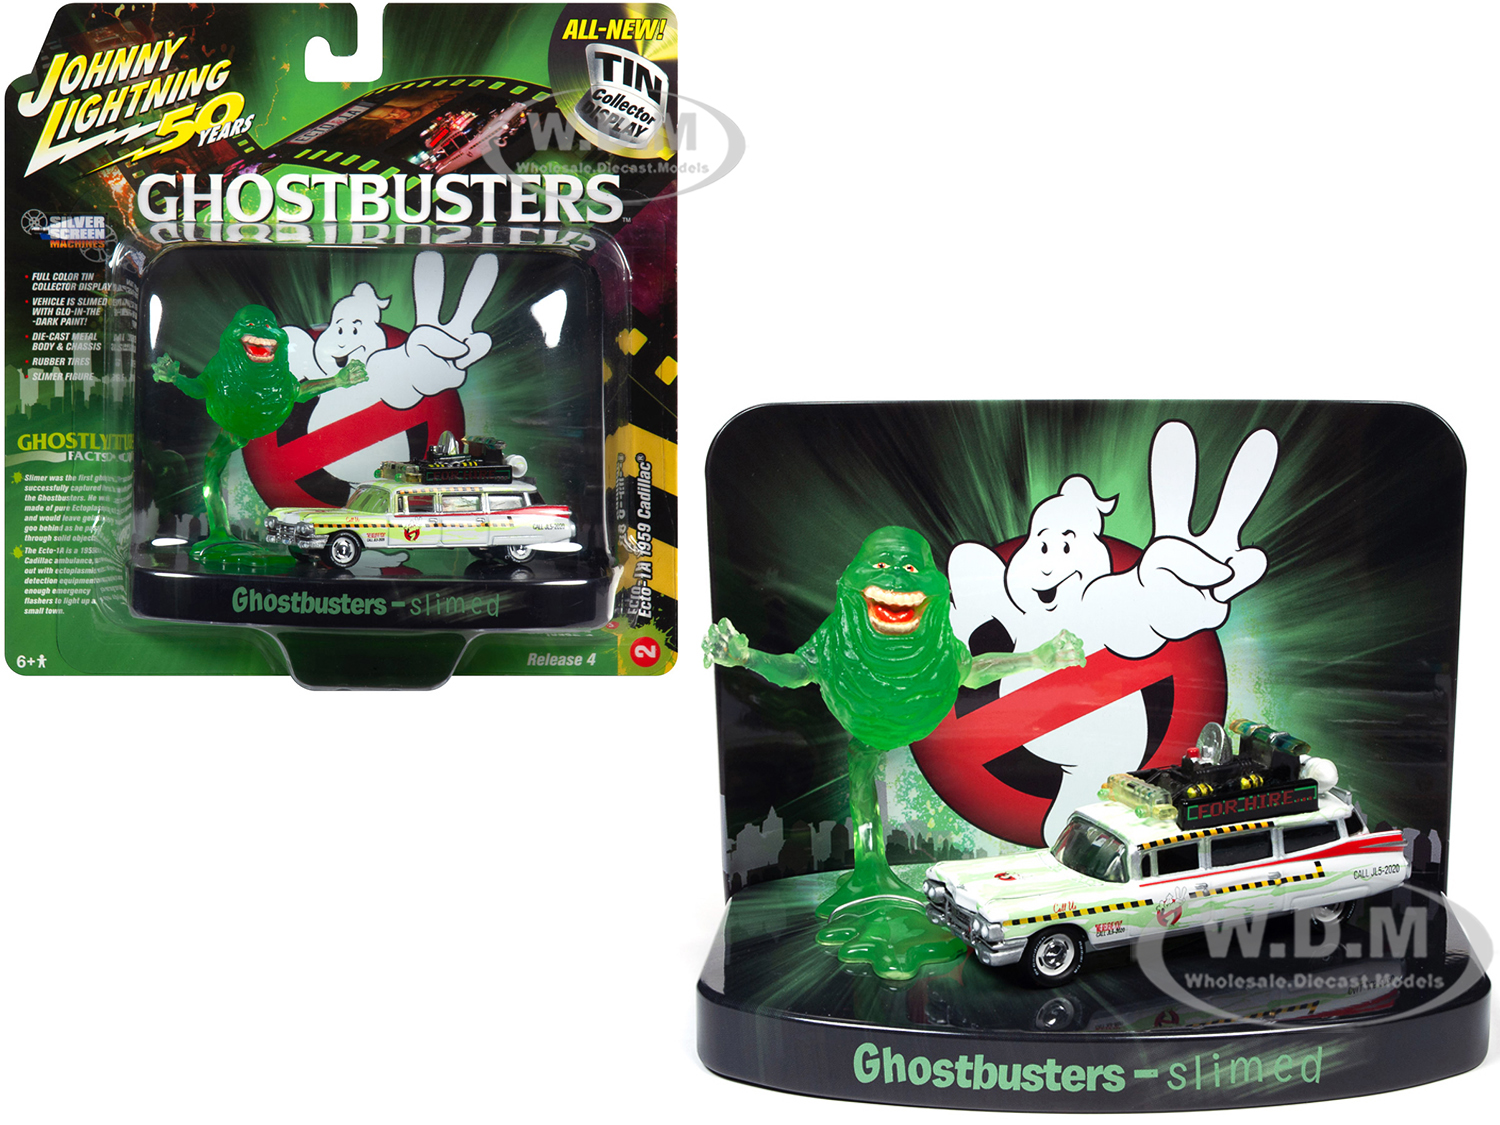 1959 Cadillac Ecto-1a Ambulance (slimed) With Slimer Figurine "ghostbusters" Movie Diorama "johnny Lightning 50th Anniversary" 1/64 Diecast Model Car